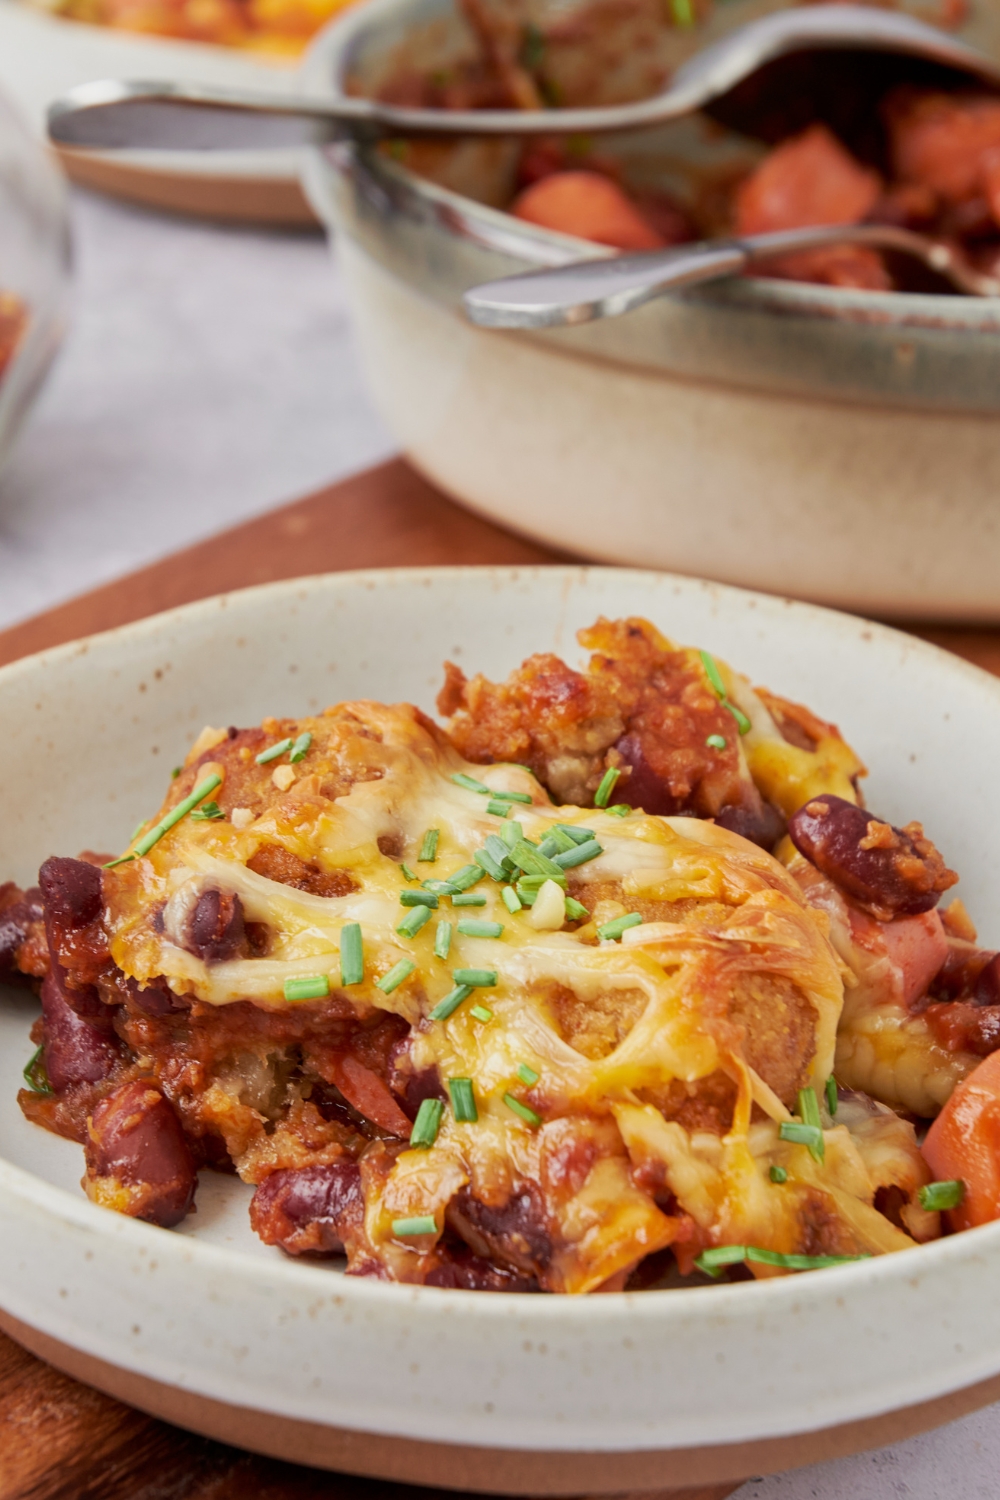 A serving of chili and hot dog casserole with tater tots and melted cheese on top. The casserole is garnished with chives.